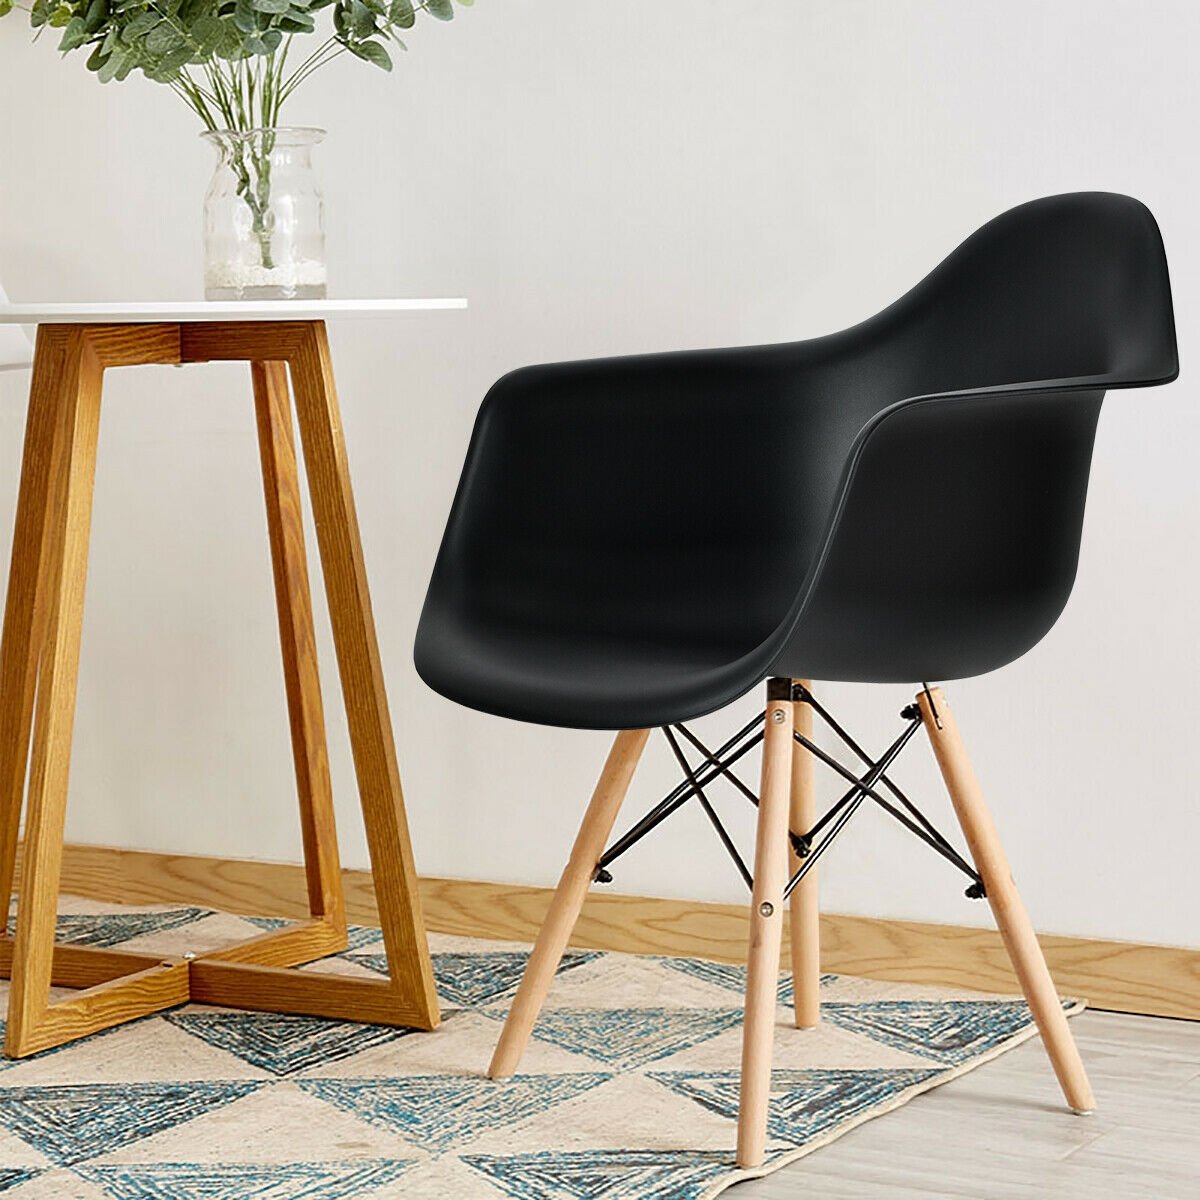 Set of 2 Mid-Century Modern Molded Dining Arm Side Chairs, Black